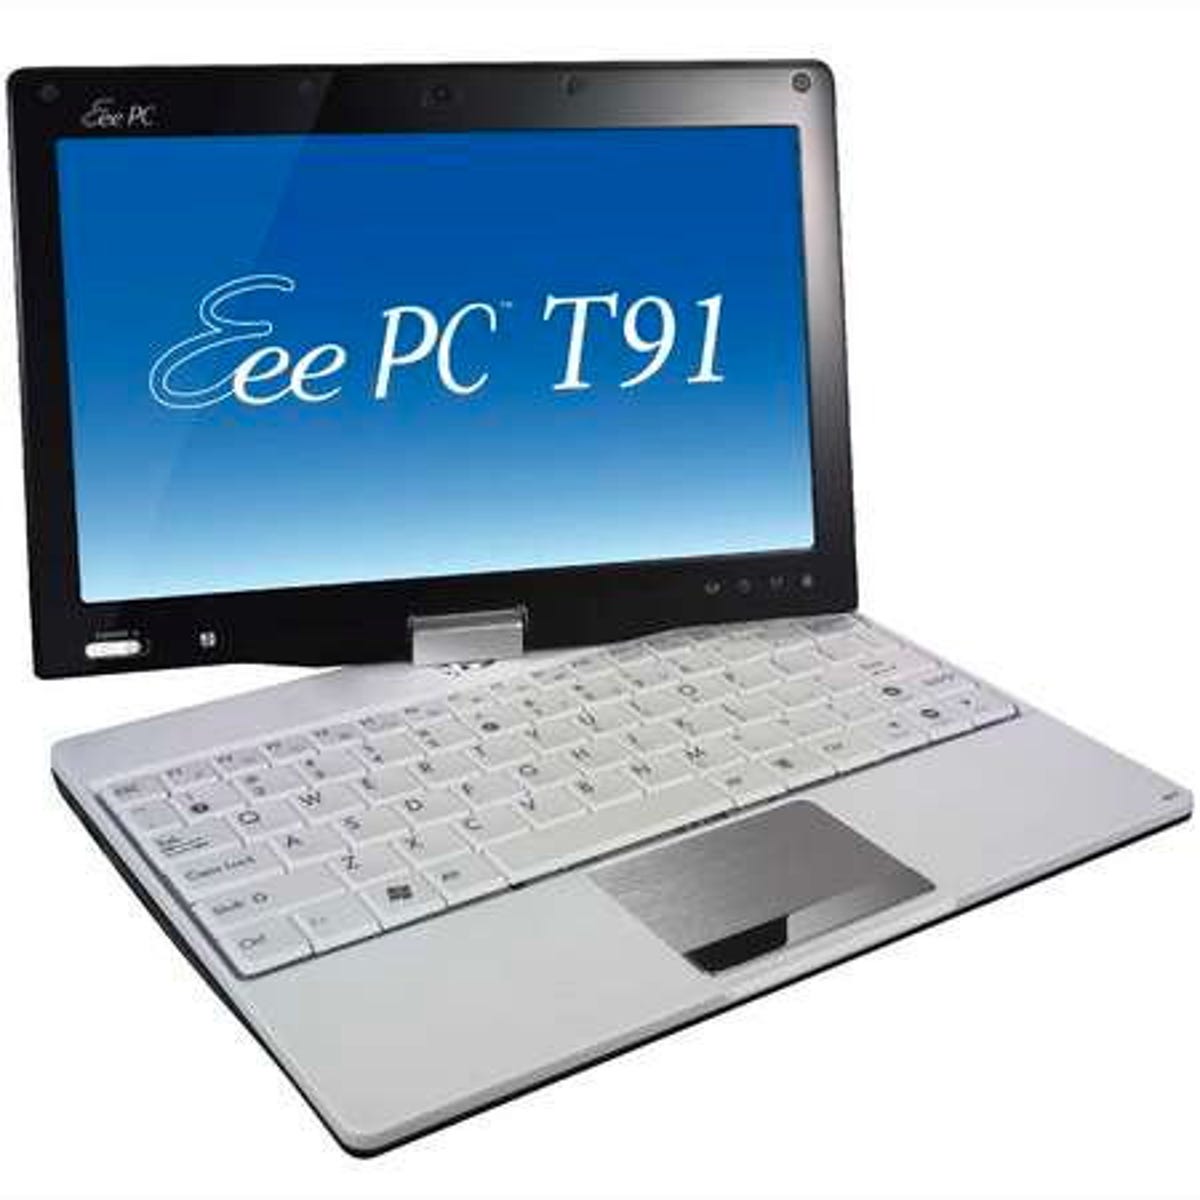 Asus's Eee PC T91 convertible tablet